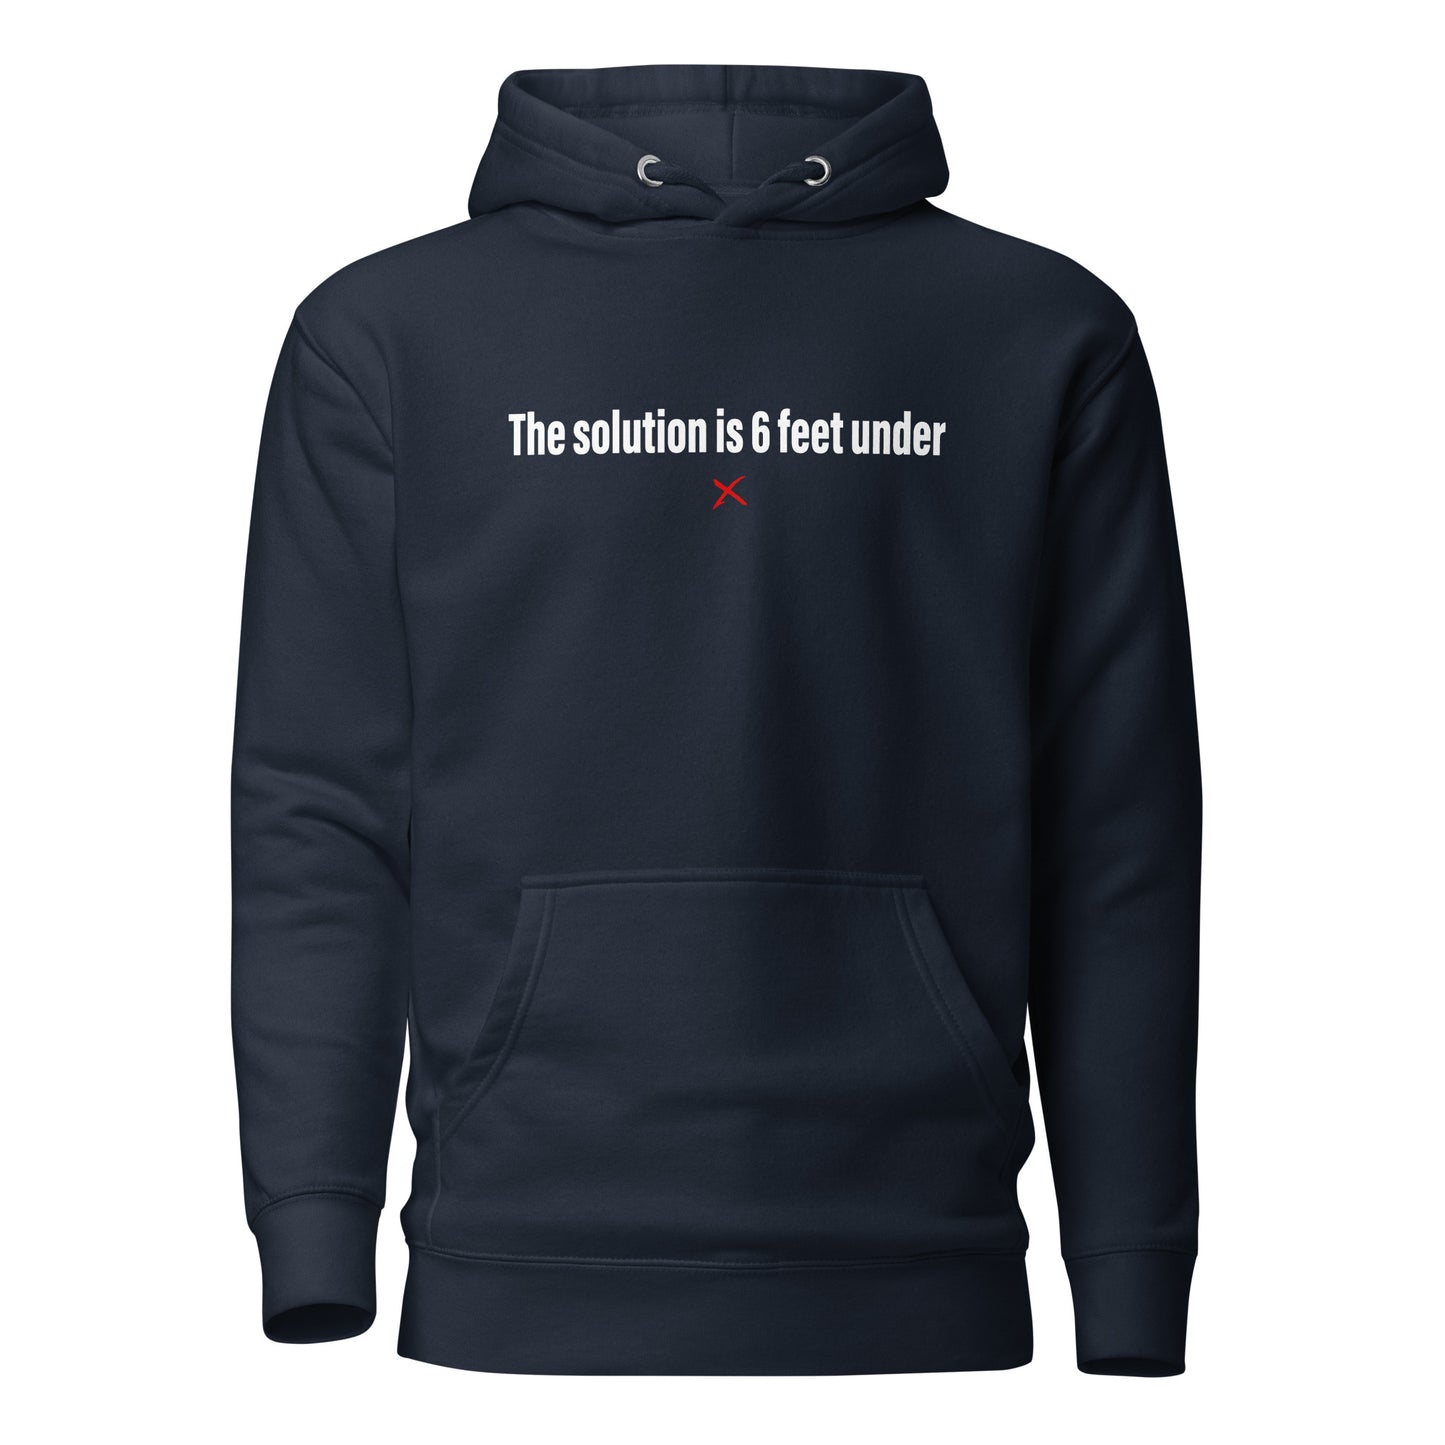 The solution is 6 feet under - Hoodie